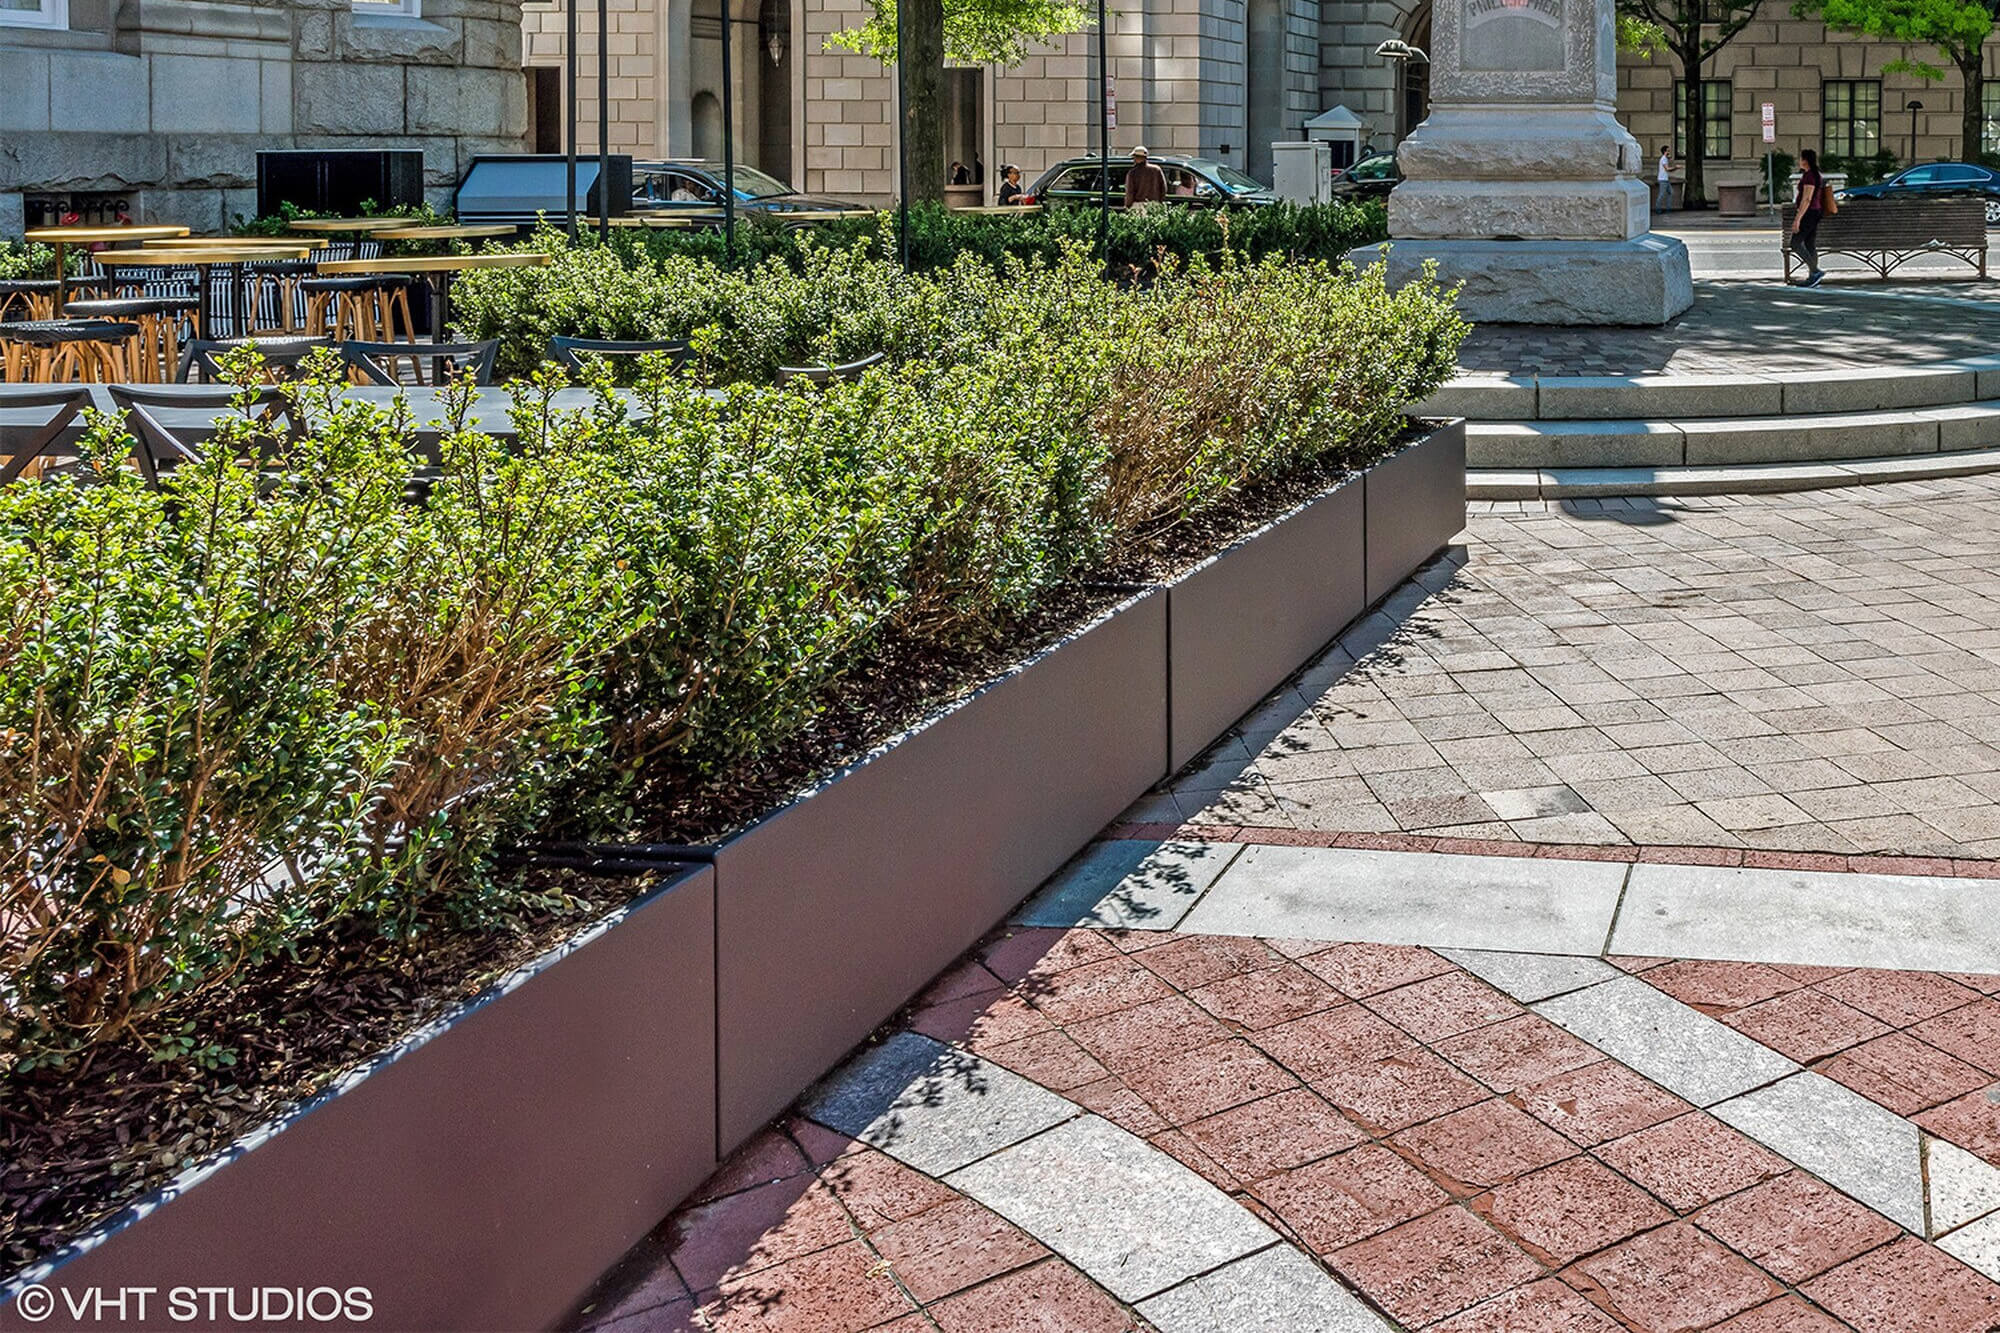 These  Garden Planters Can Be Used in Urban Spaces